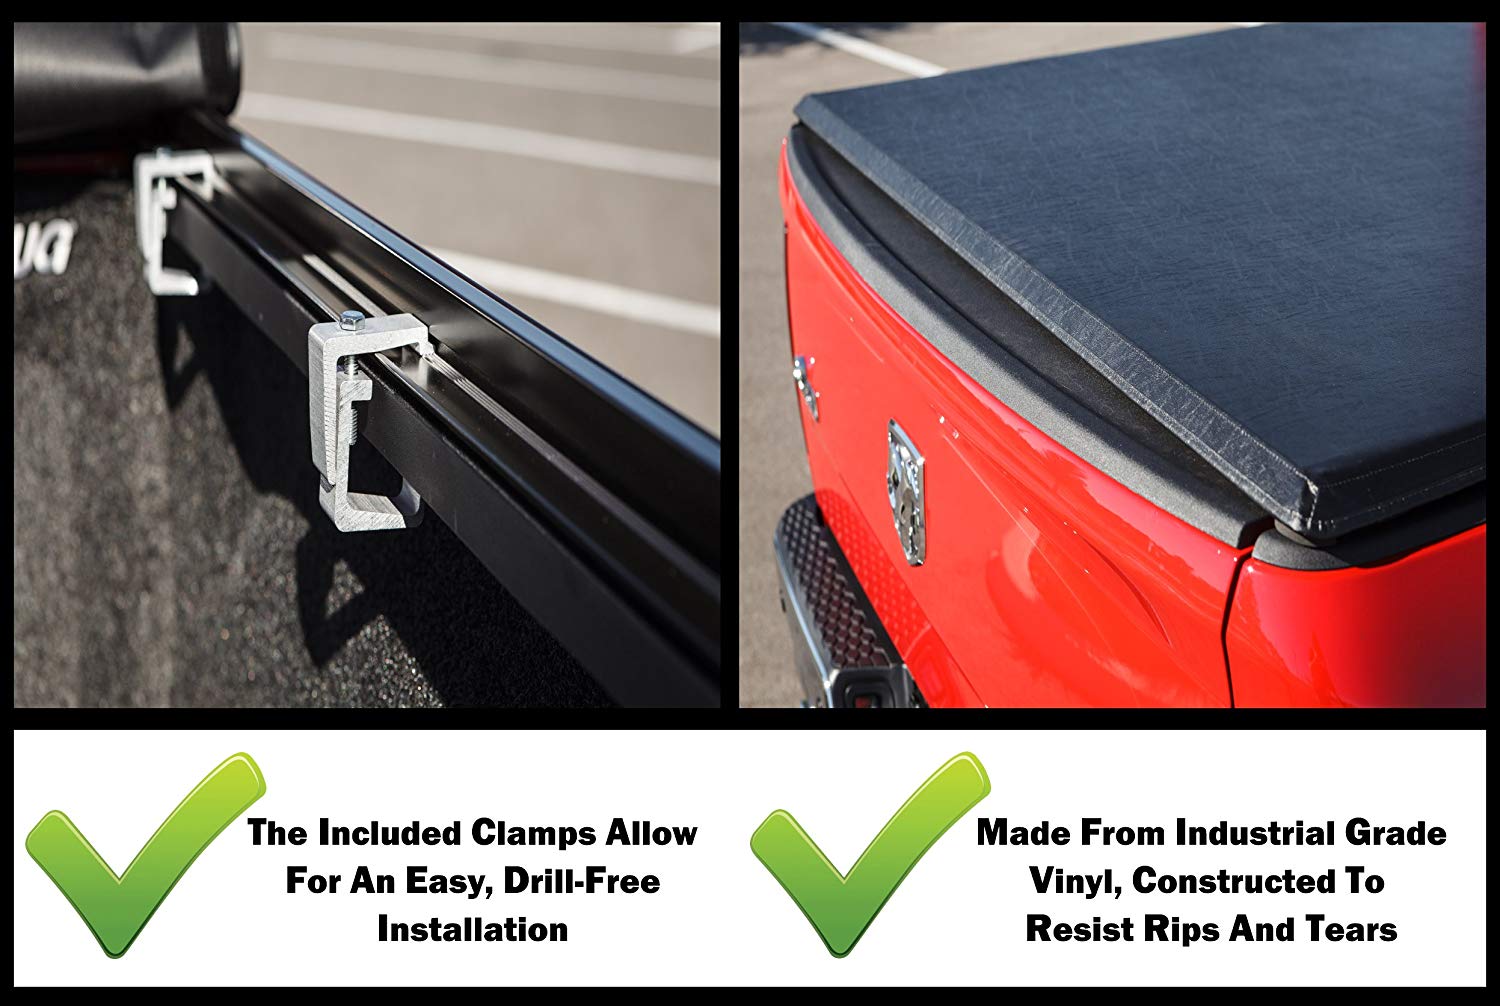 Gator by RealTruck SR1 Roll-Up (Compatible with) 2007-2013 Chevy Silverado GMC Sierra 6.5 FT Bed Only Soft Roll Up Tonneau Truck Bed Cover (55106) Made in The USA - image 5 of 7